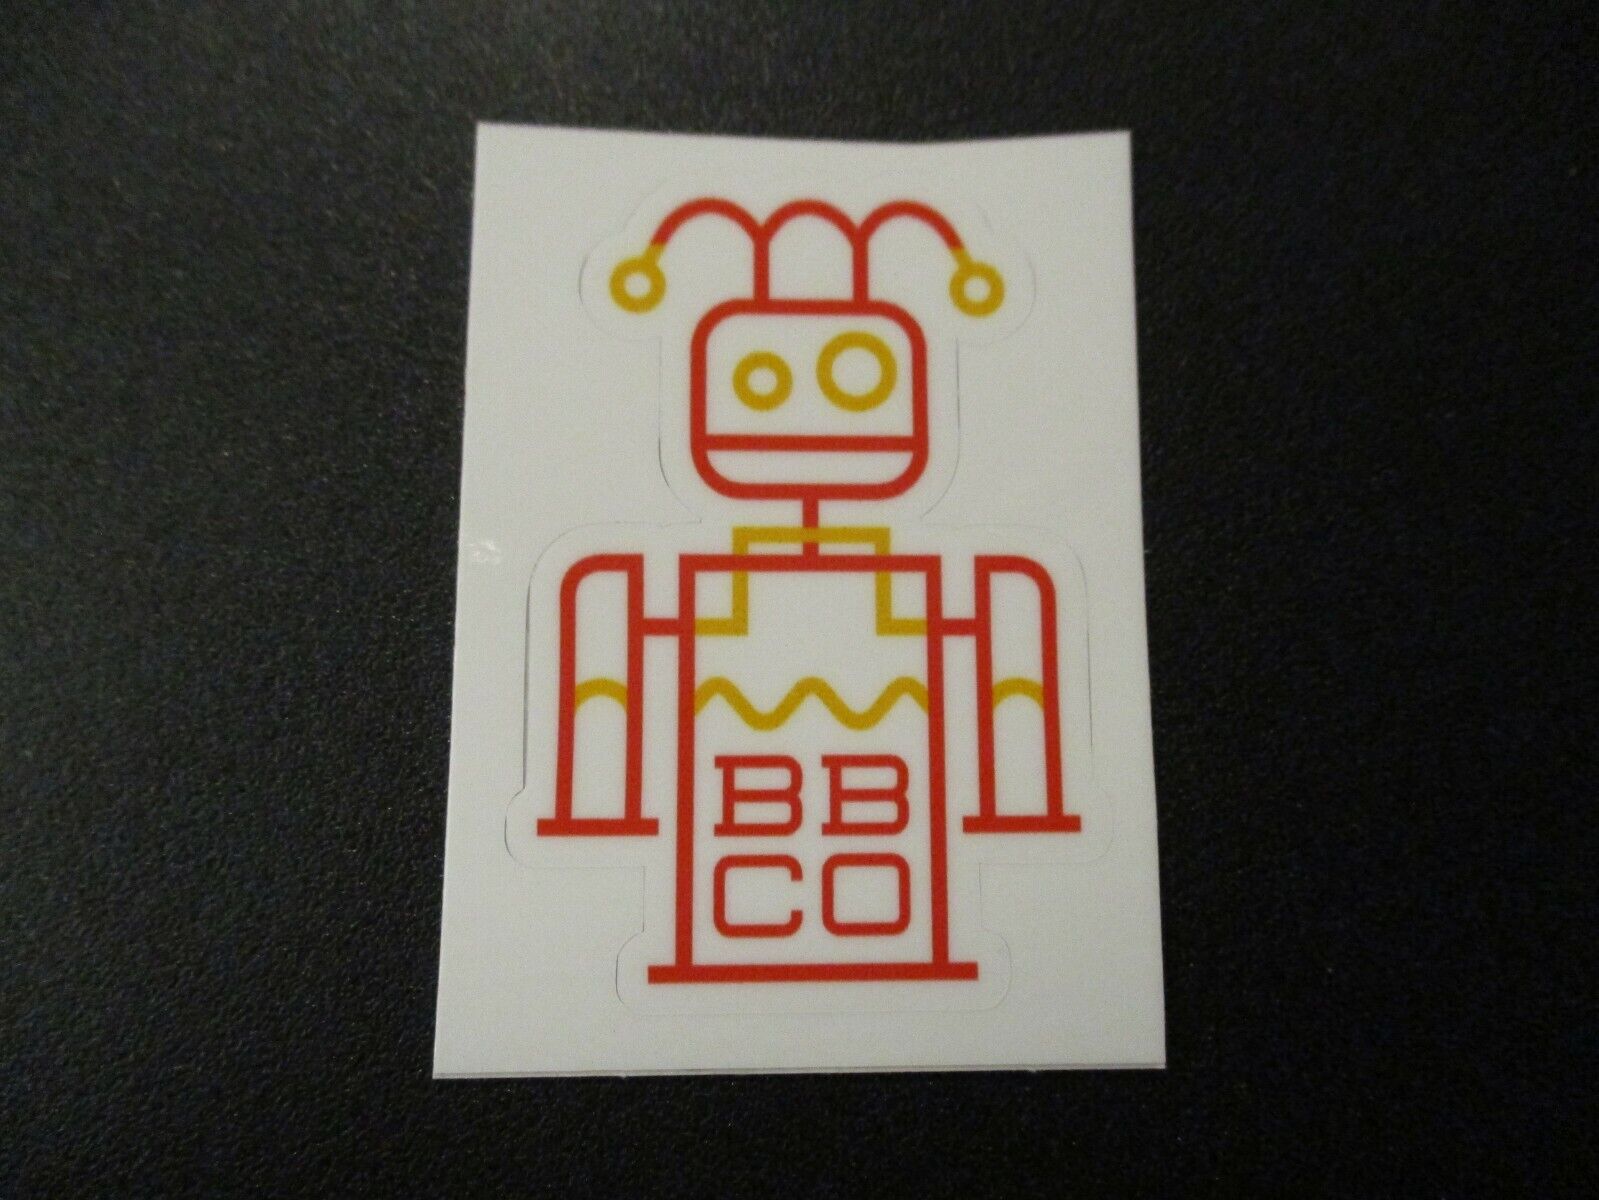 BURLINGTON BEER CO Uncanny Valley Robot whit STICKER decal craft brewing brewery